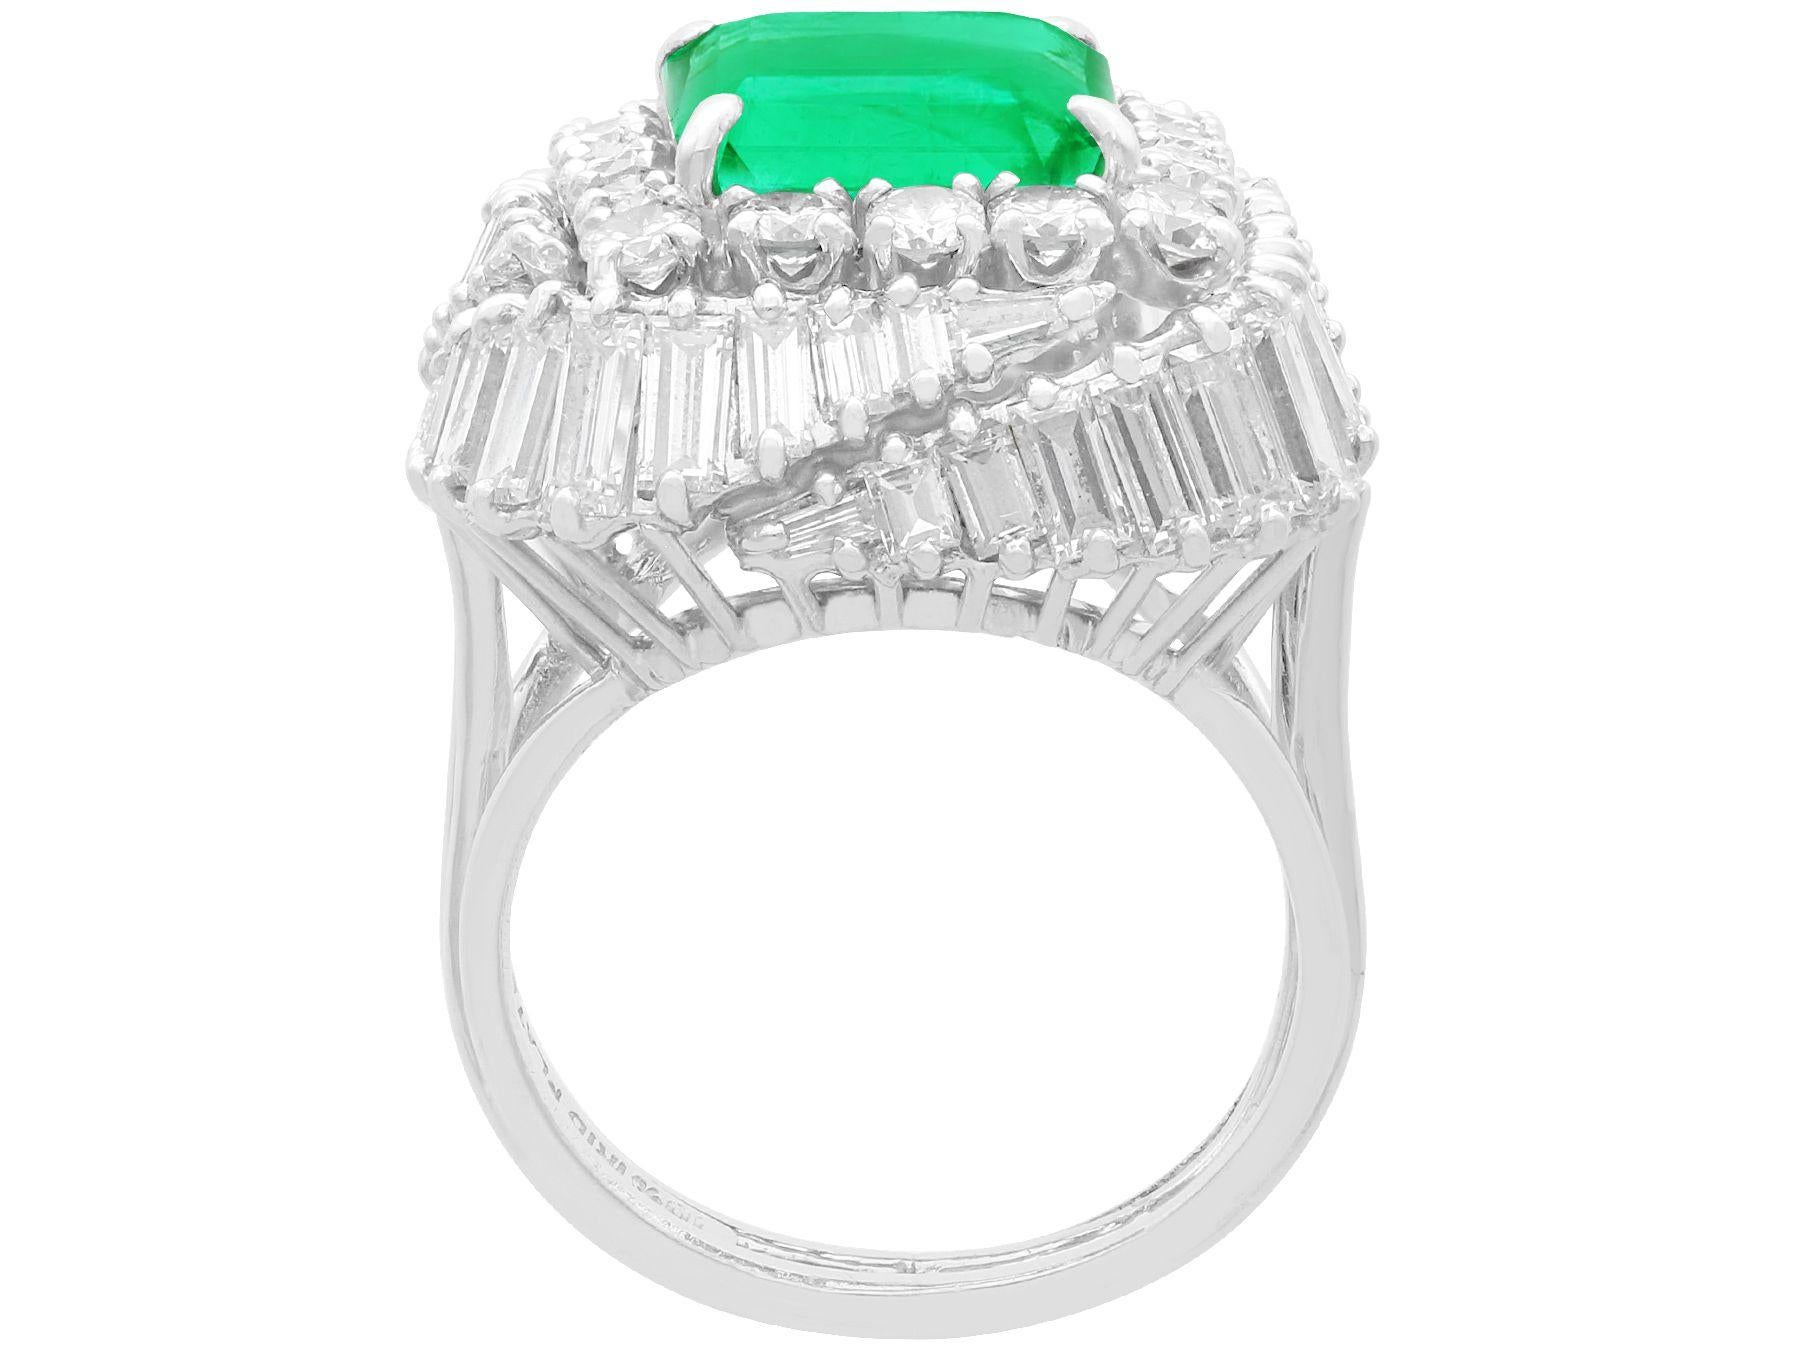 Vintage 5.11Ct Colombian Emerald and 3.32 Carat Diamond Platinum Dress Ring For Sale 1